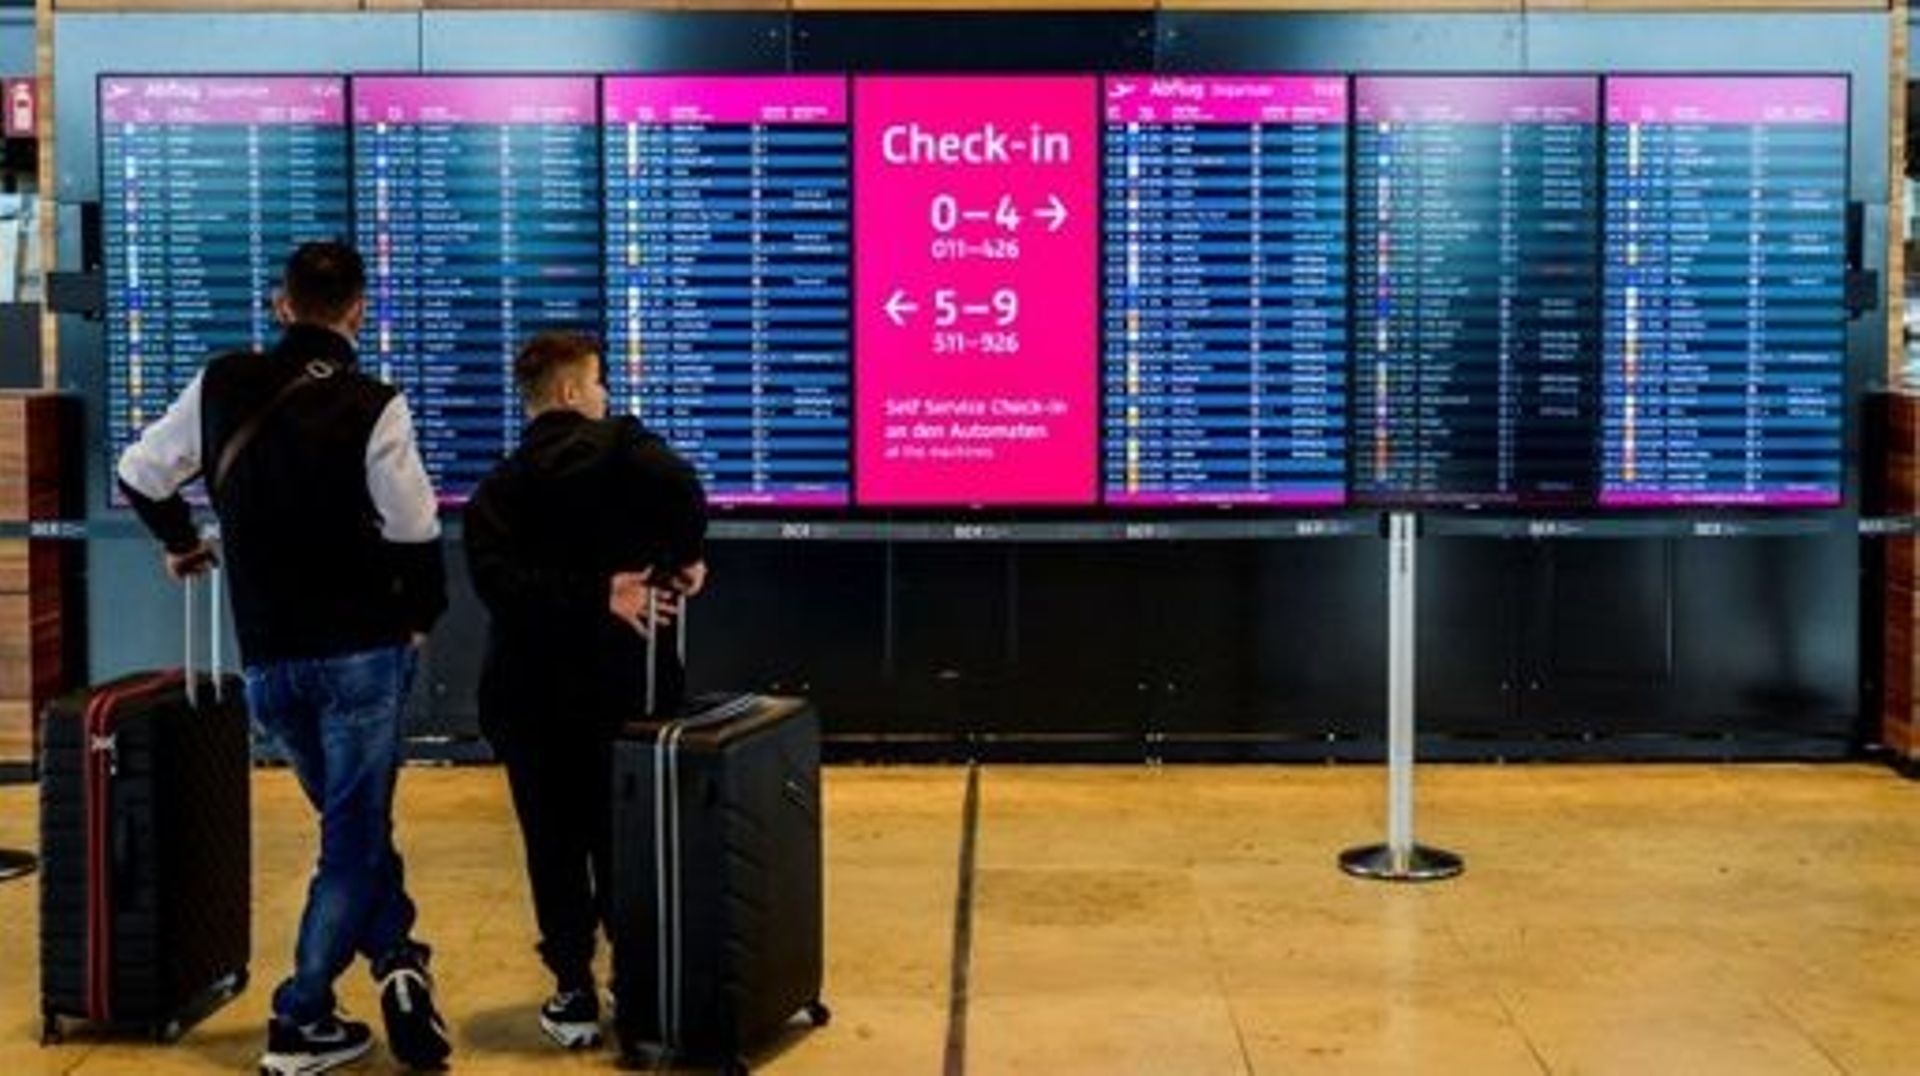 Passengers check out a digital billboard displaying flight information at Berlin Brandenburg International airport's terminal 1 near Schoenefeld on July 7, 2022, on the first day of the school holidays for the state of Berlin.   John MACDOUGALL / AFP